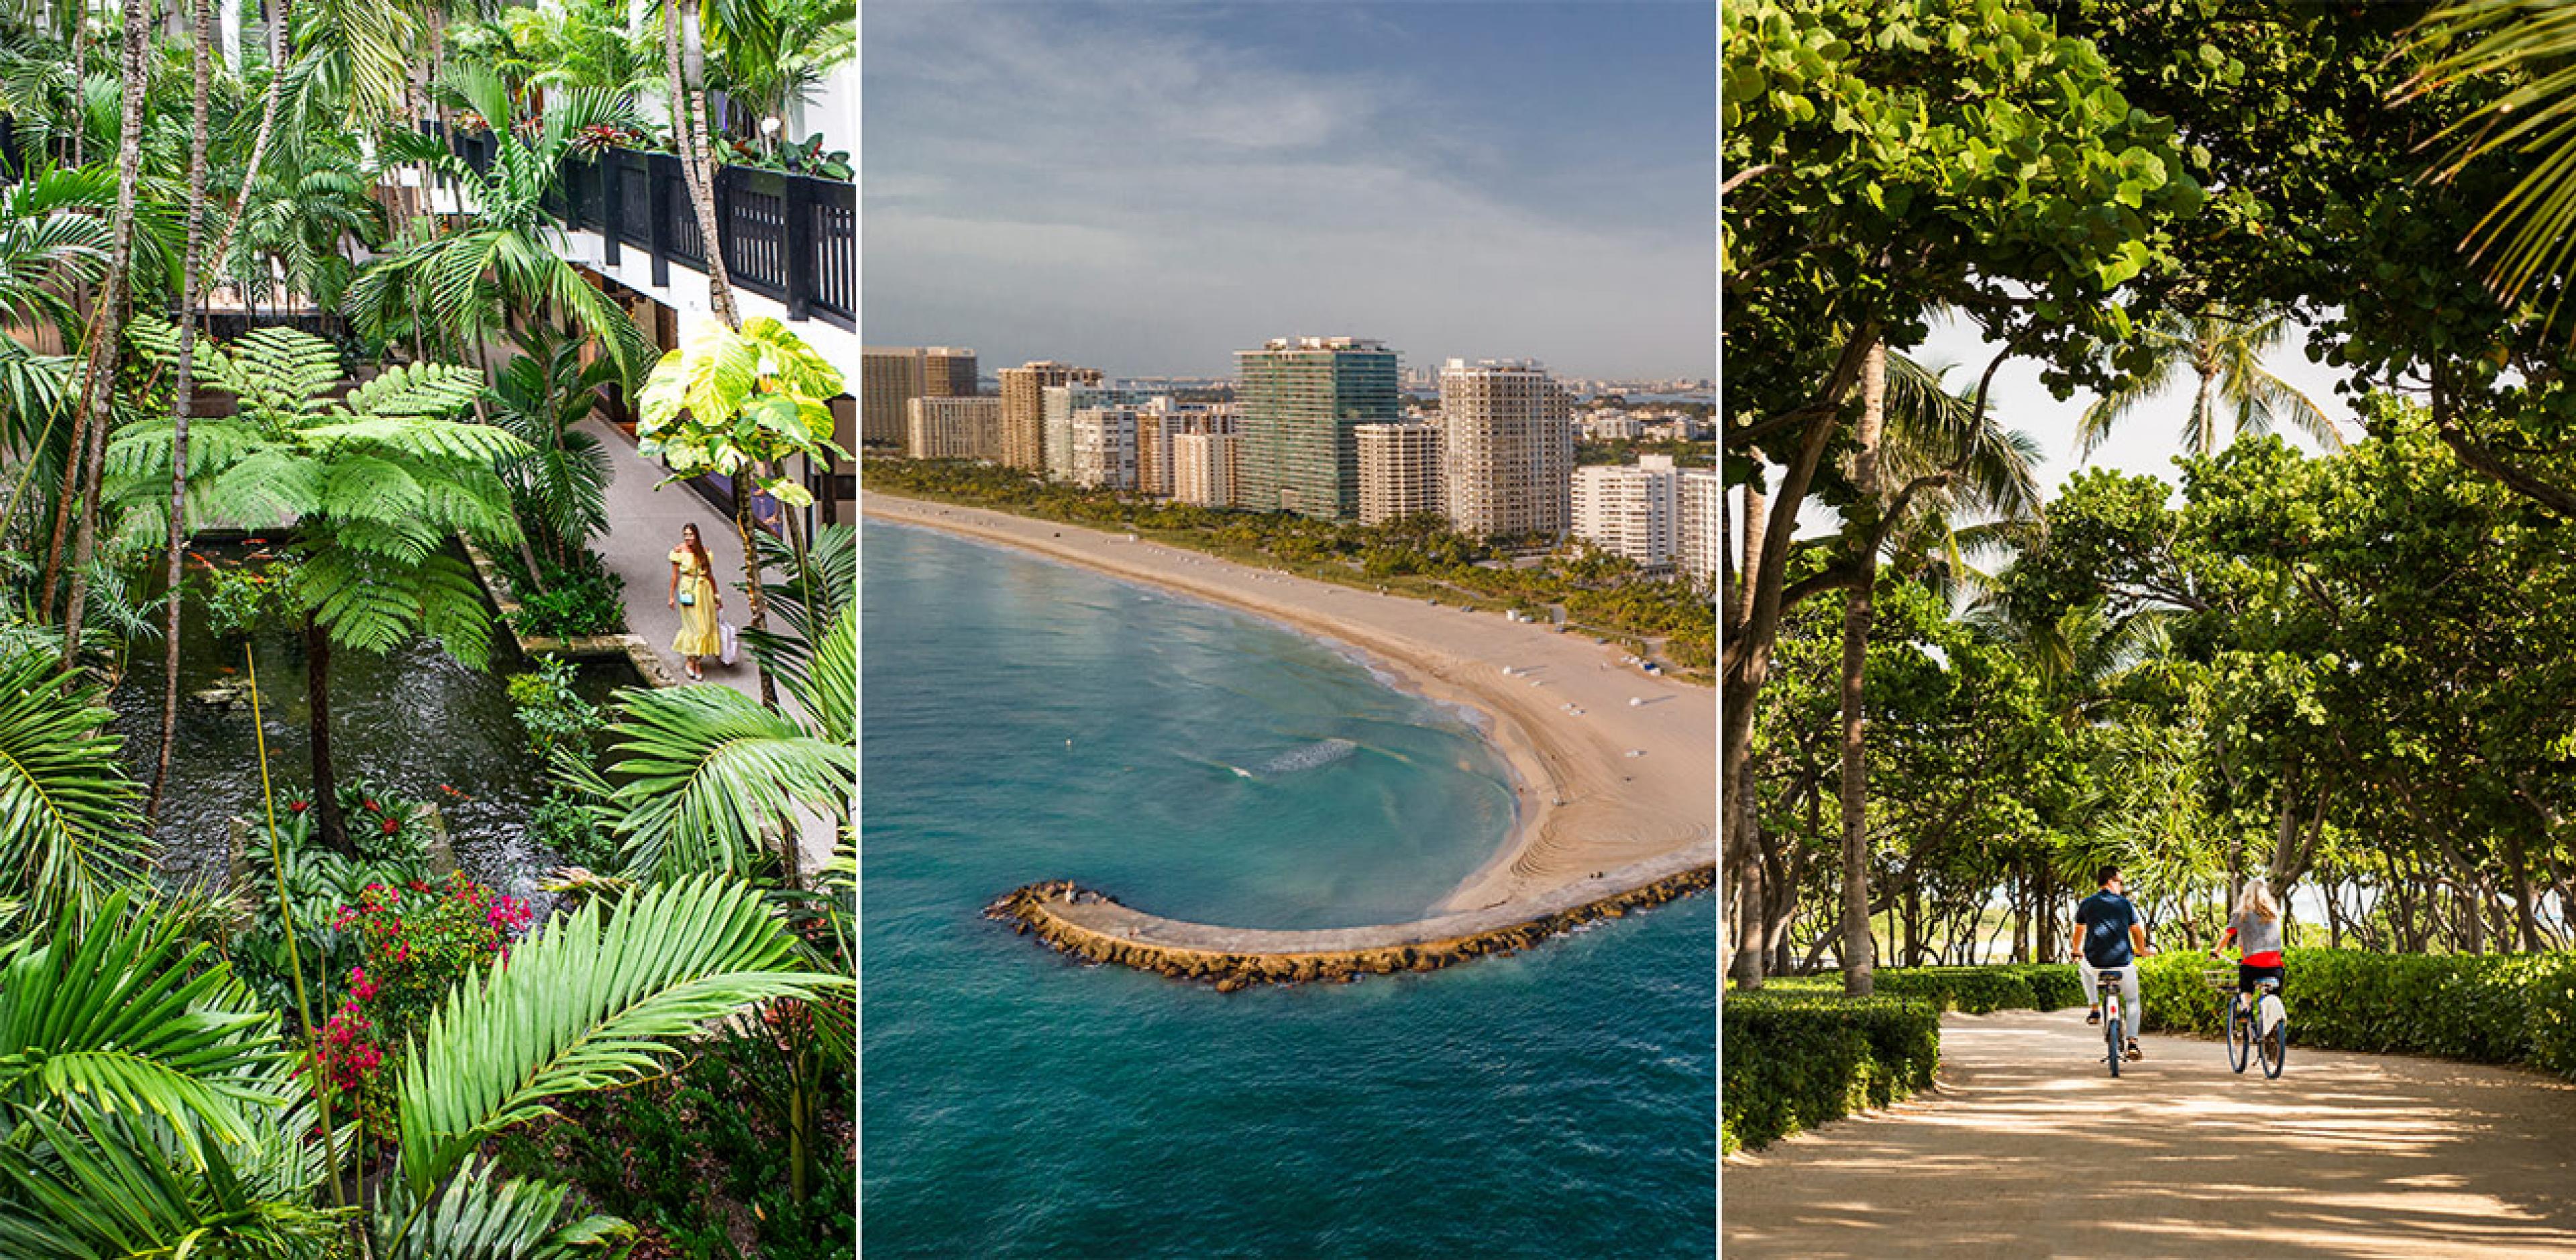 three images - on left looking down at a woman walking past palm trees in a mall; in middle a view of glassy highrises along a beach; on right two people biking on a path surrounded by palm trees